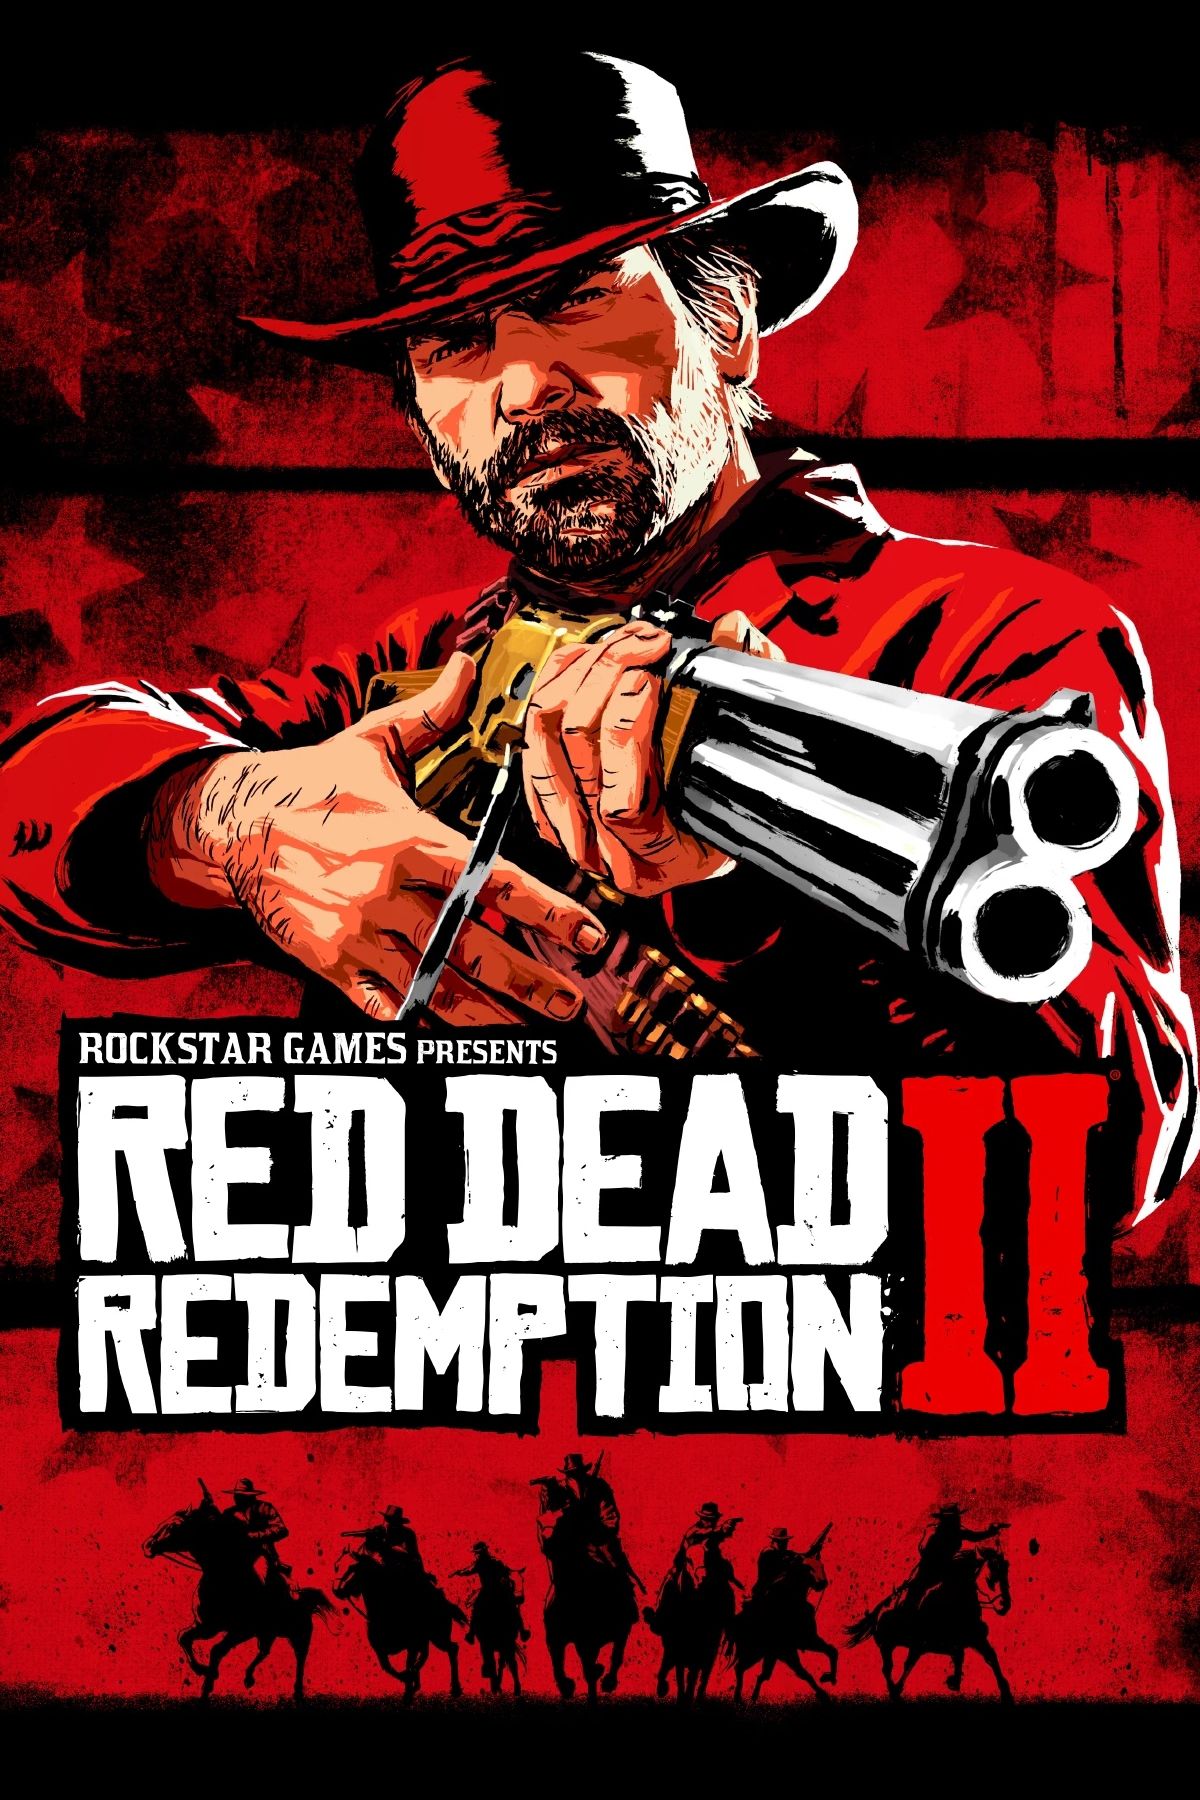 red dead redemption 2 poster with Arthur Morgan and silhouette of the gang